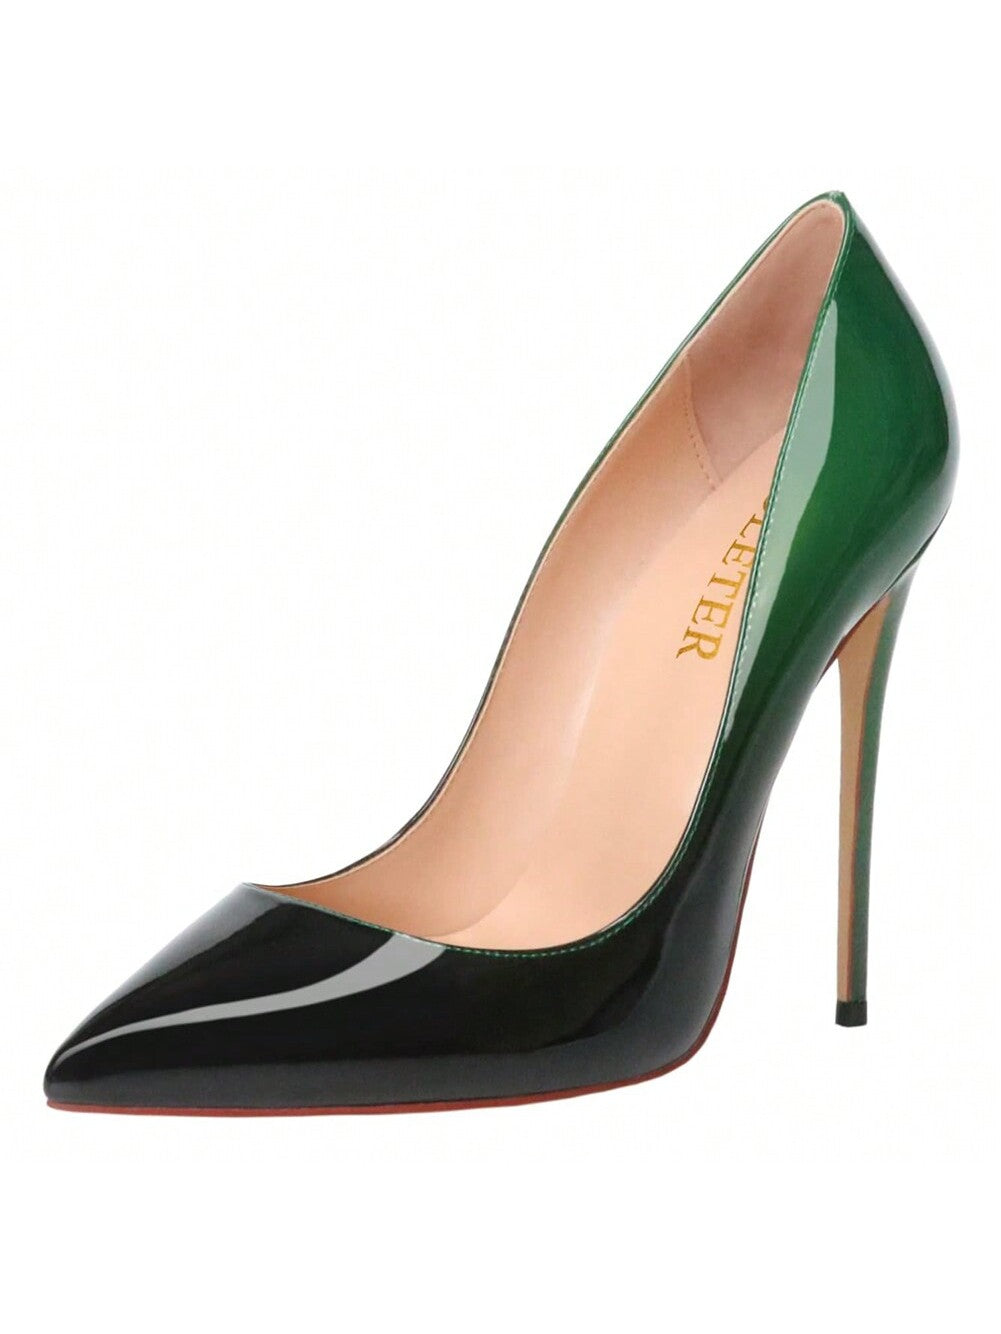 Elegant Two-Tone Patent Pointed Toe Stiletto High Heel Pumps